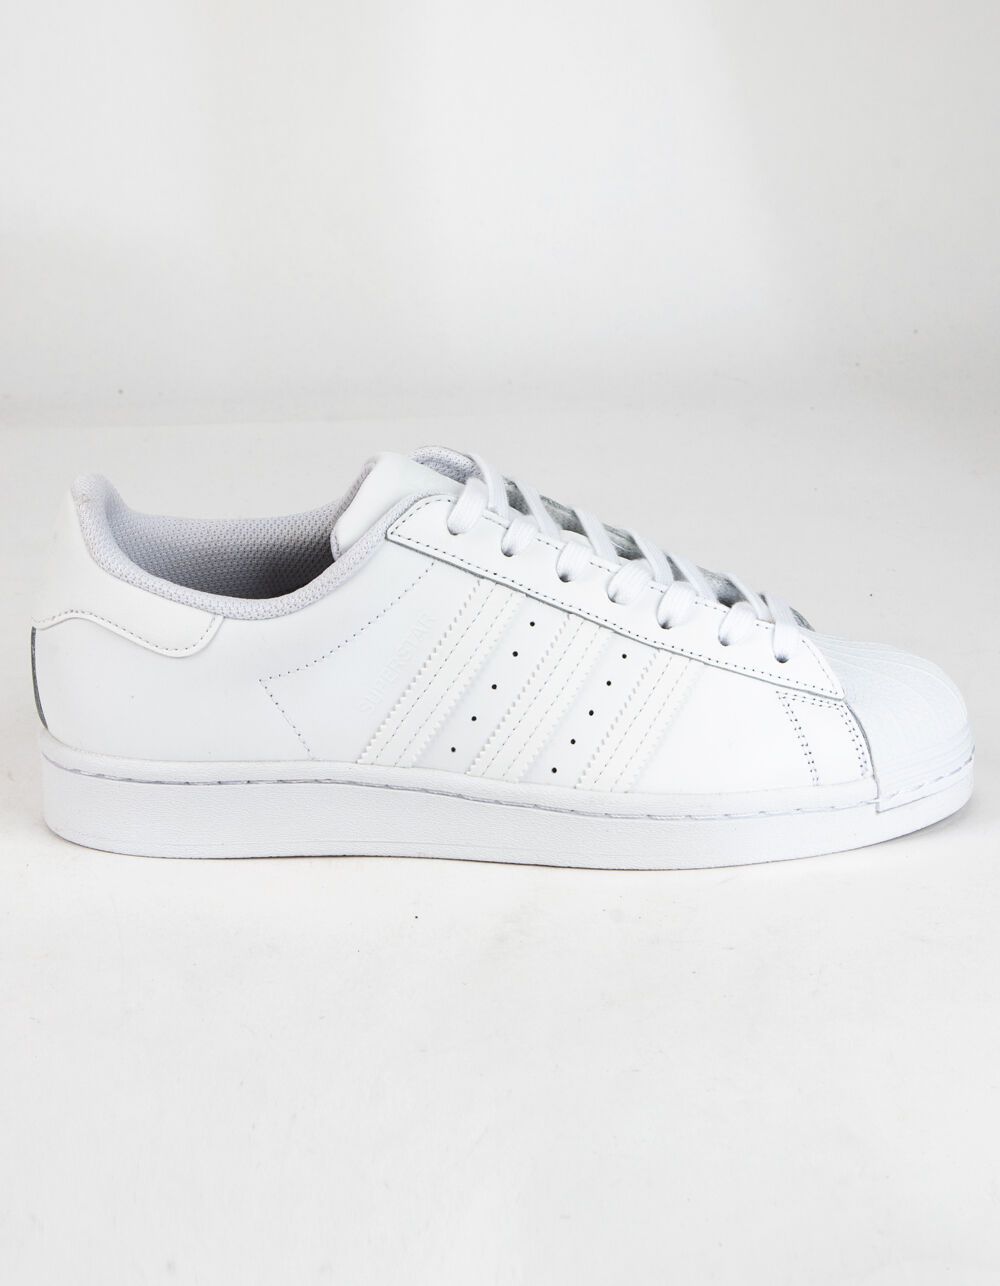 ADIDAS Superstar White Shoes | Tillys